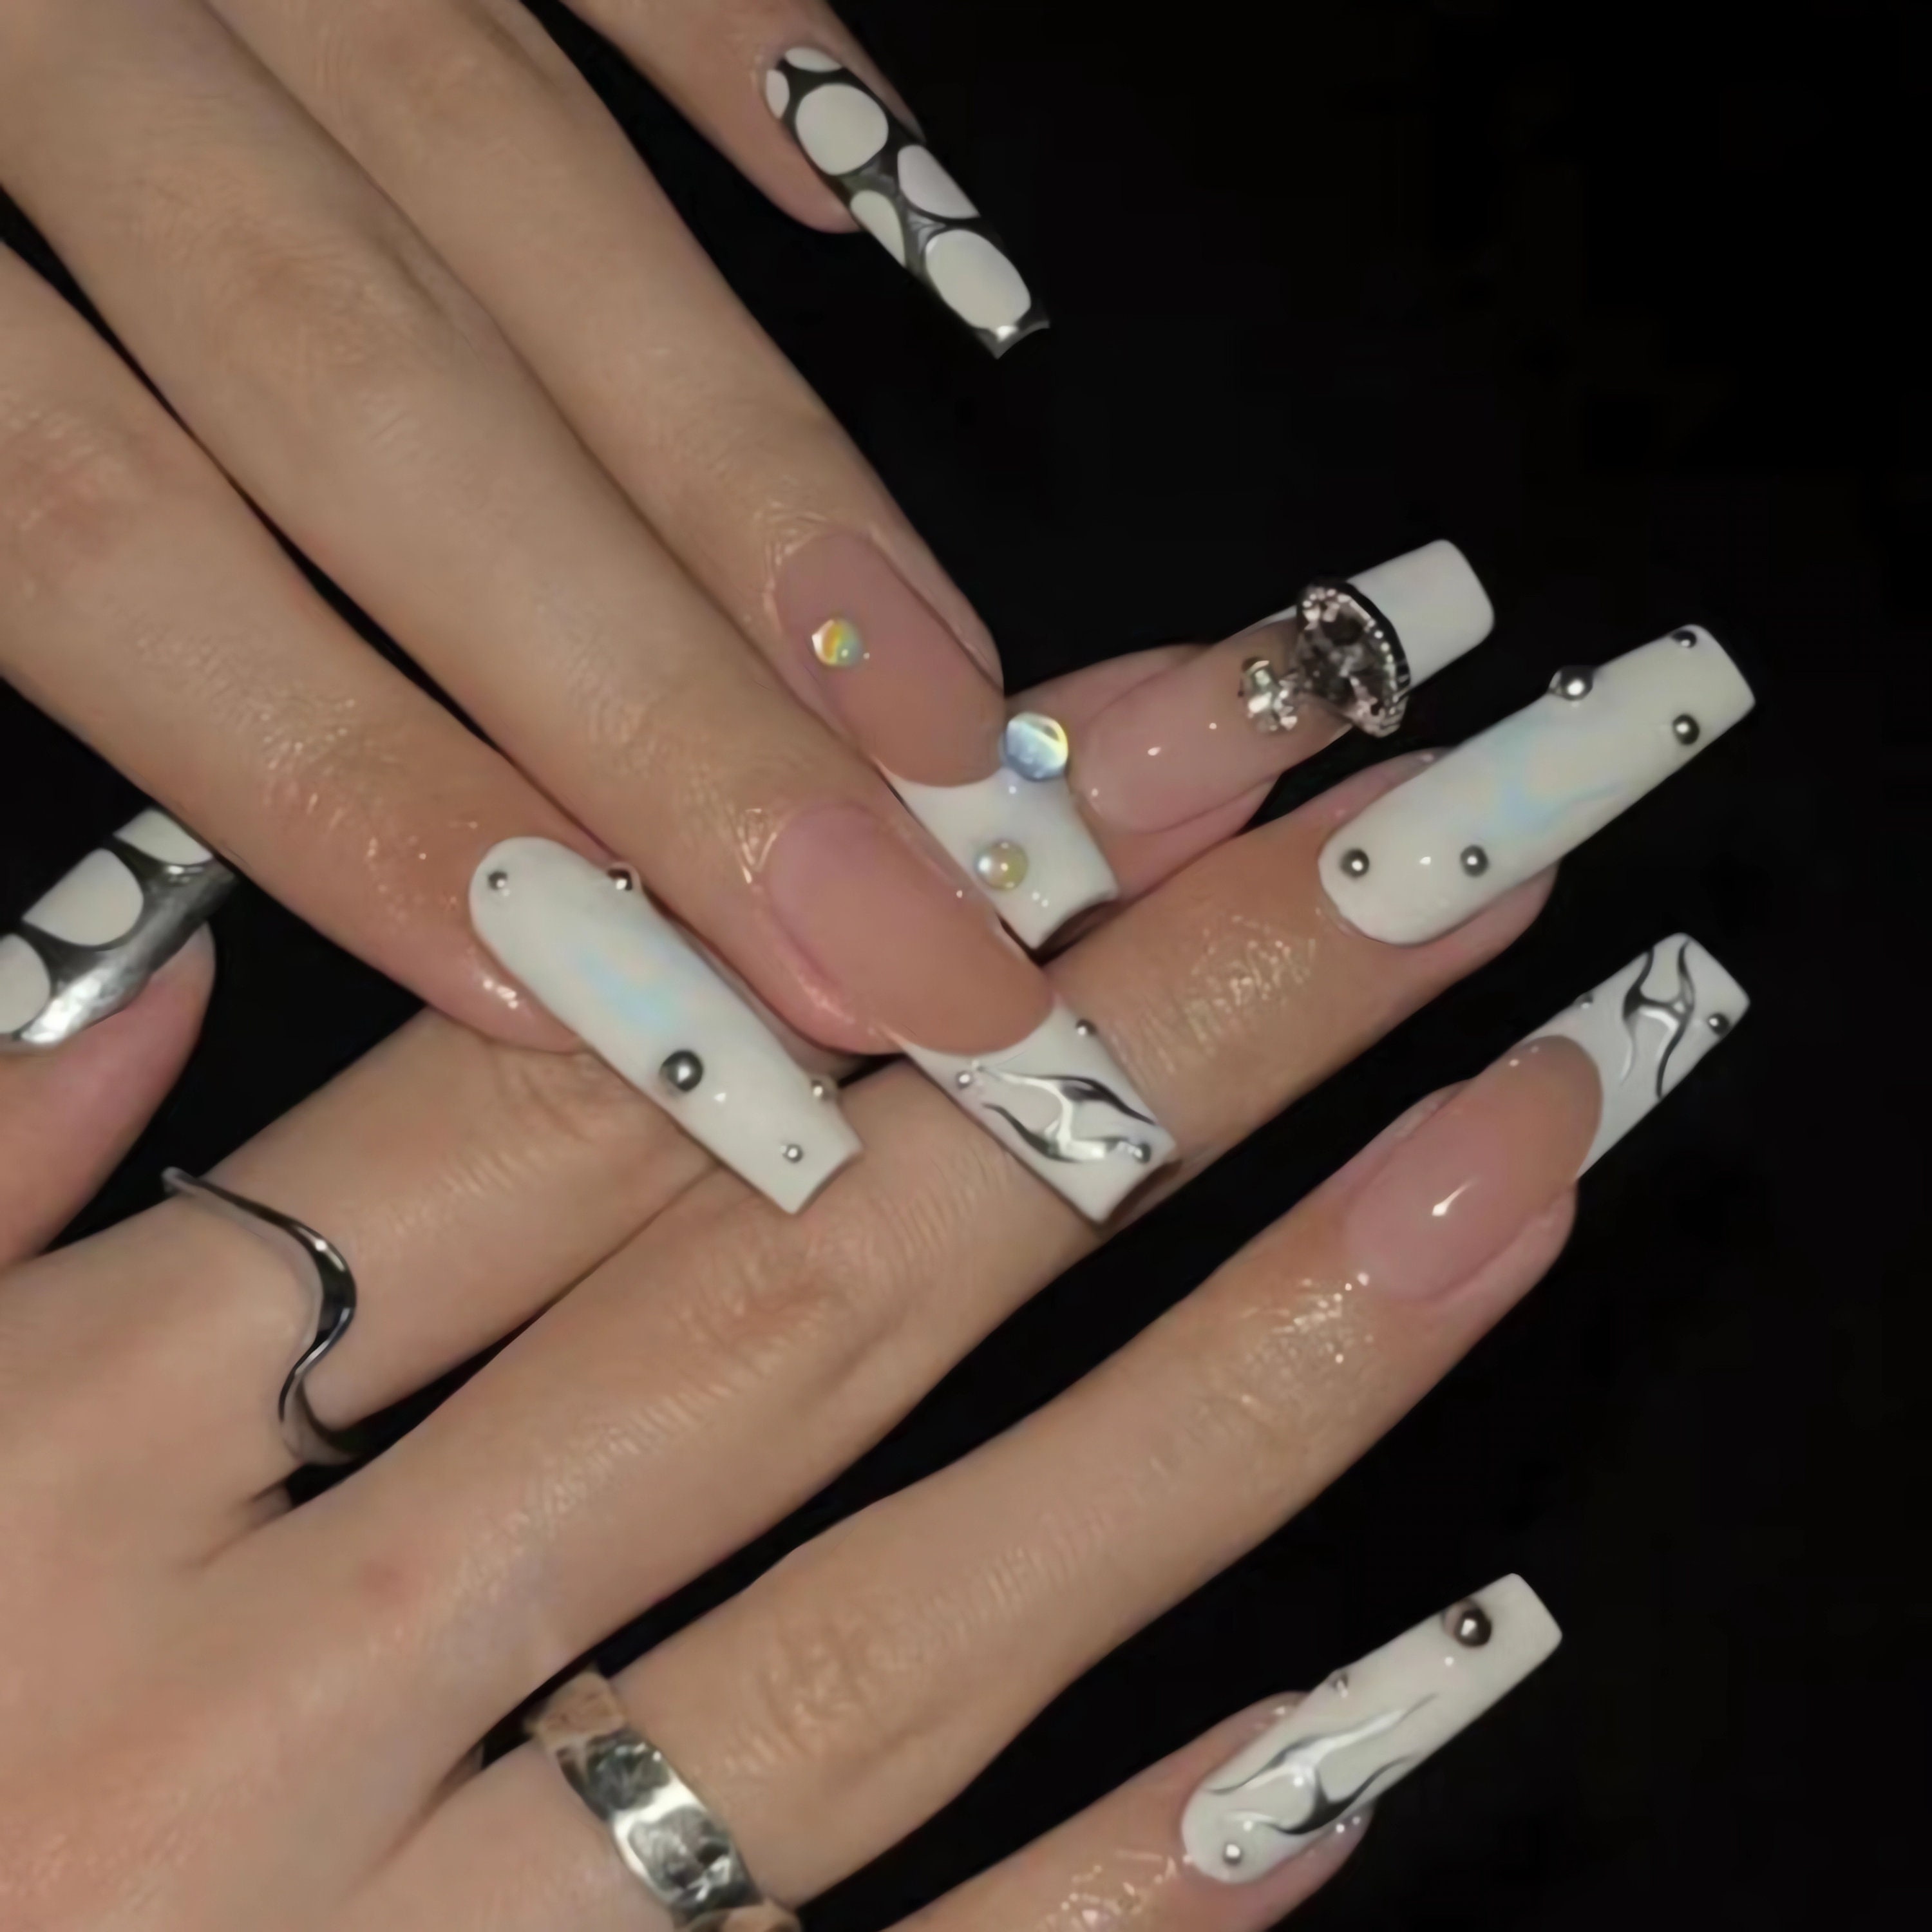 Milky White Pink Bling Press on Nails White Nails Long Nails Pink